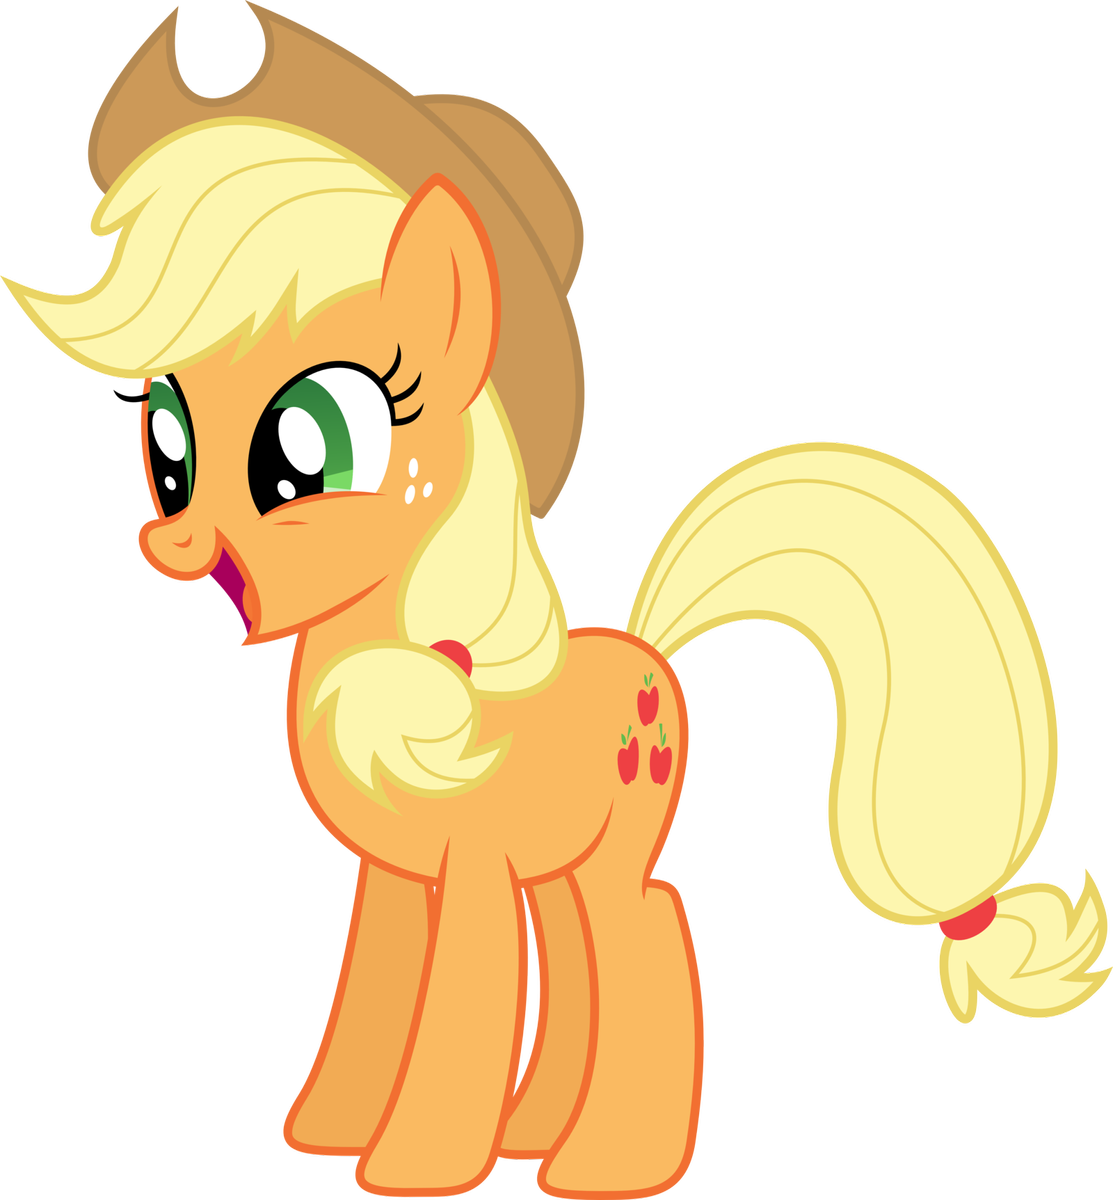 Applejack 3 by xpesifeindx-d5gsde5